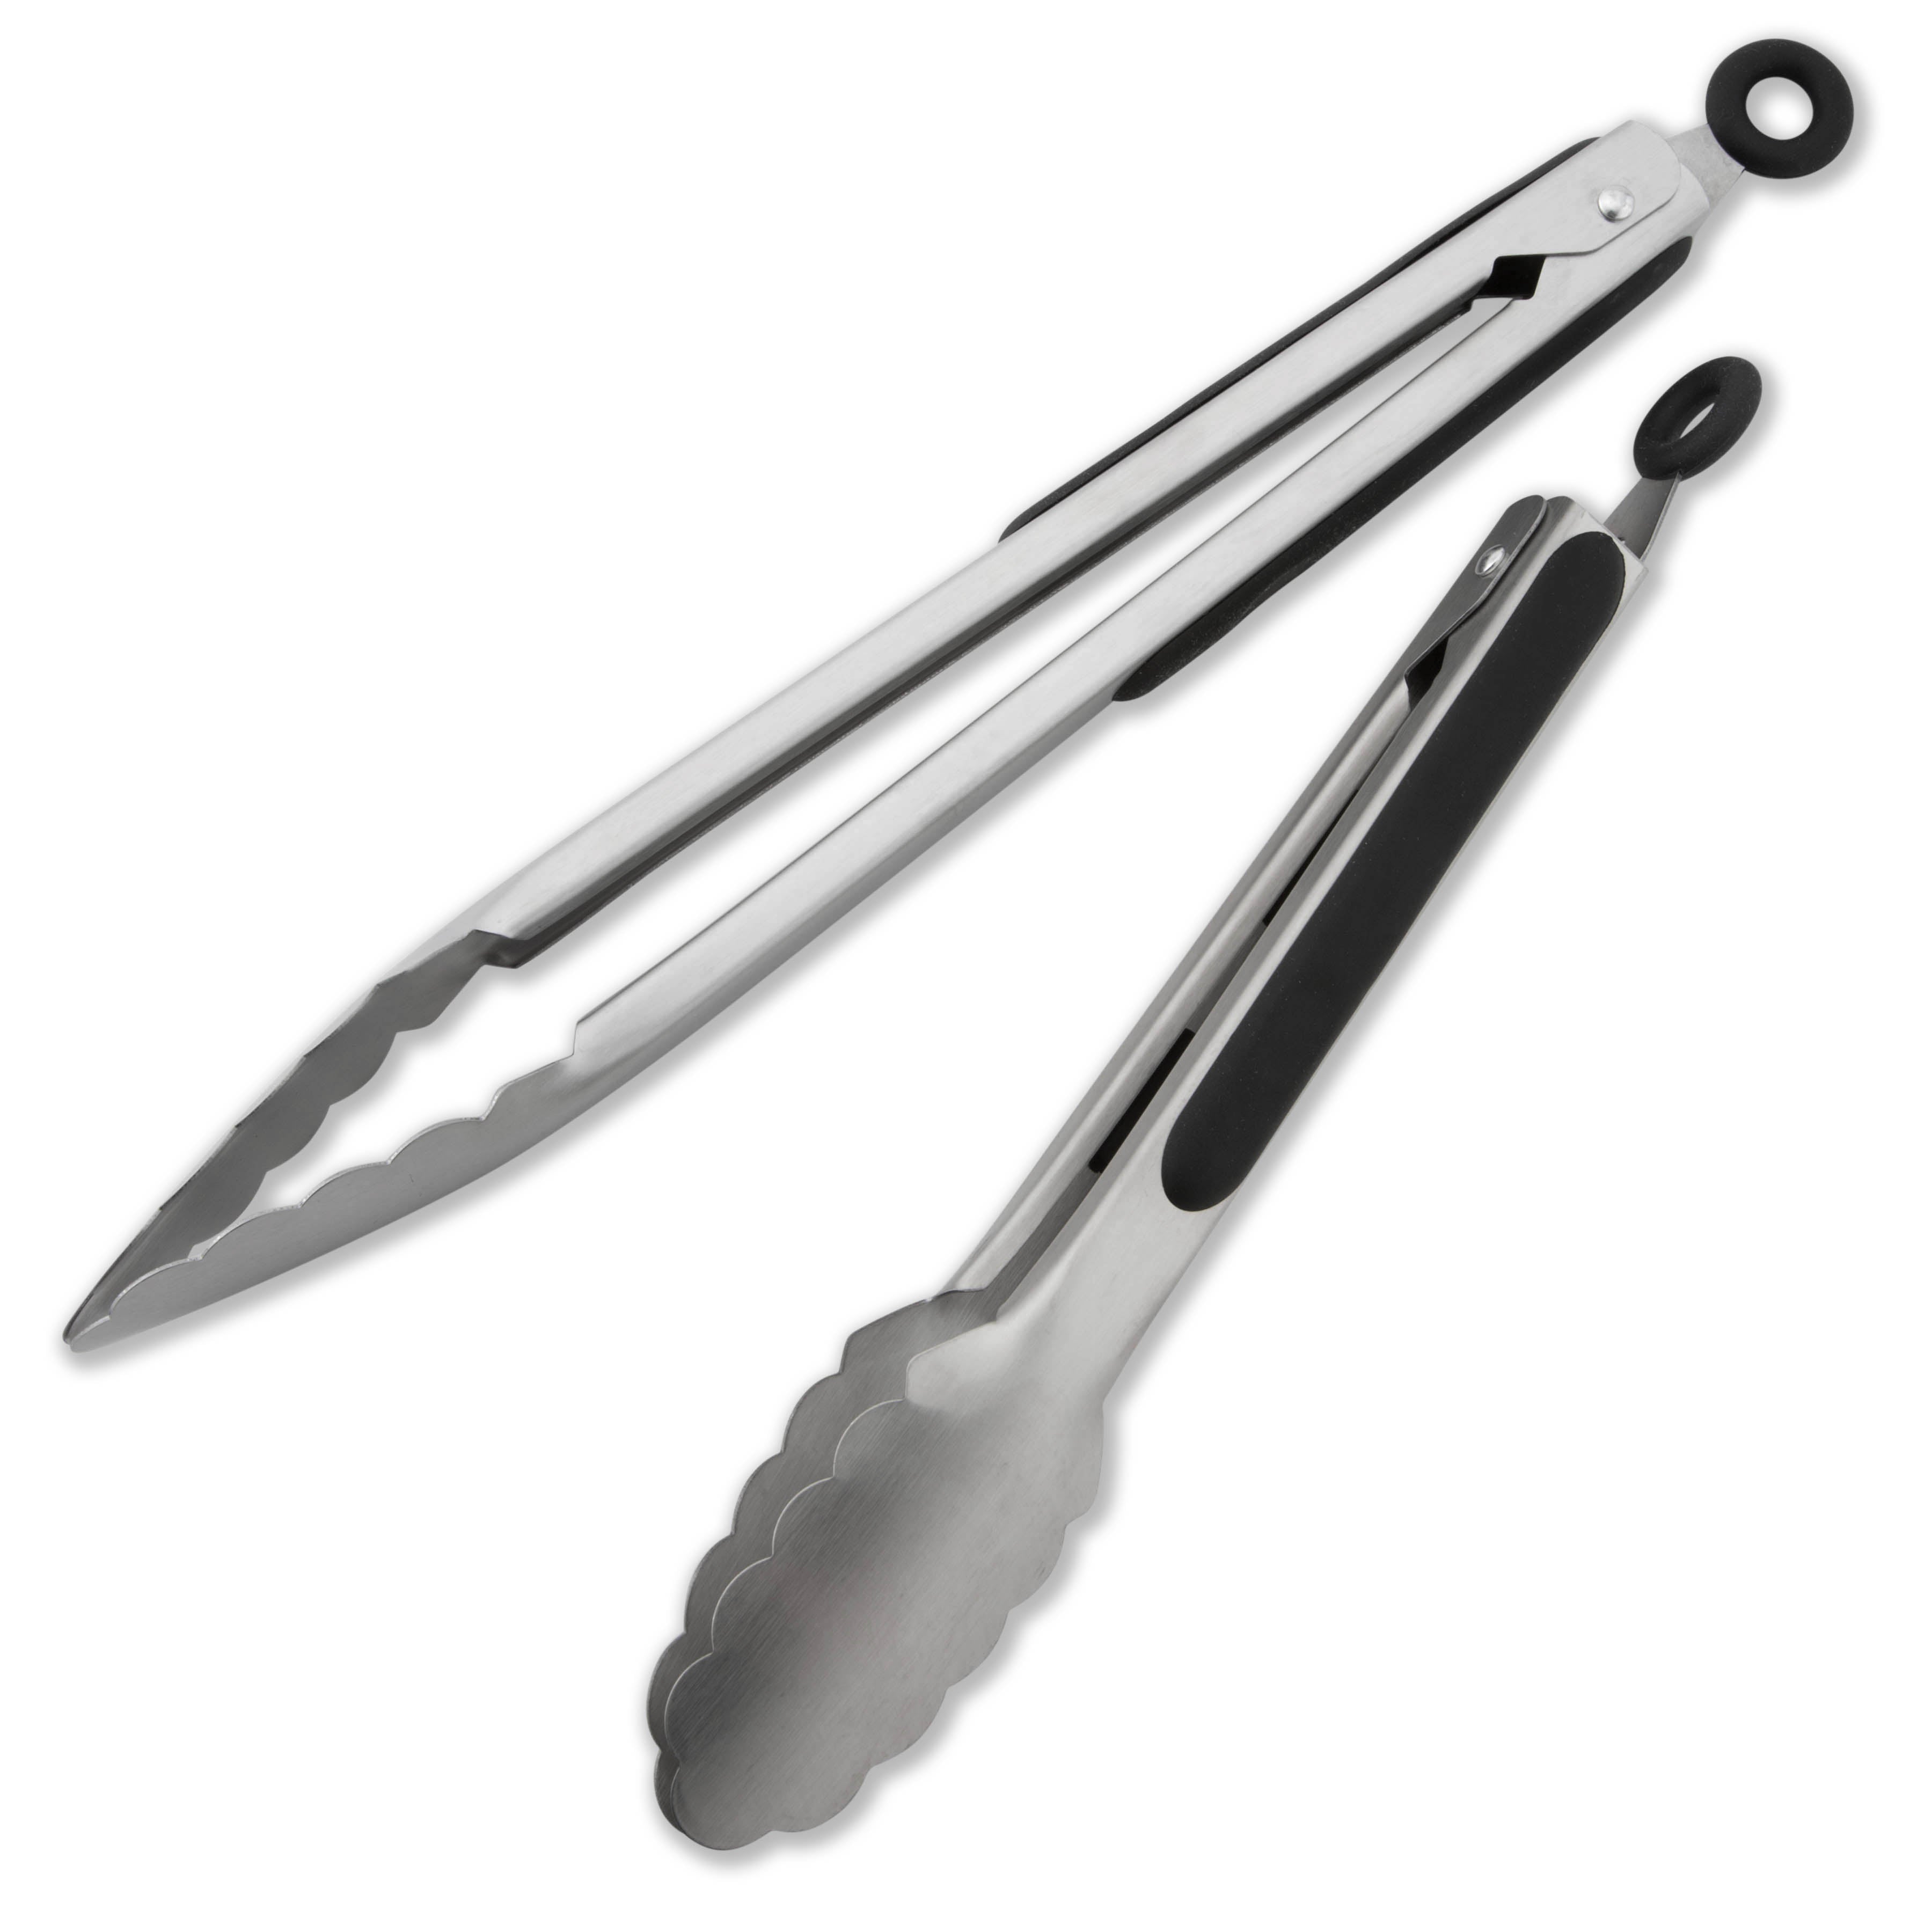 New Star Foodservice 35759 12-Inch Utility Spring Tongs, Stainless Ste